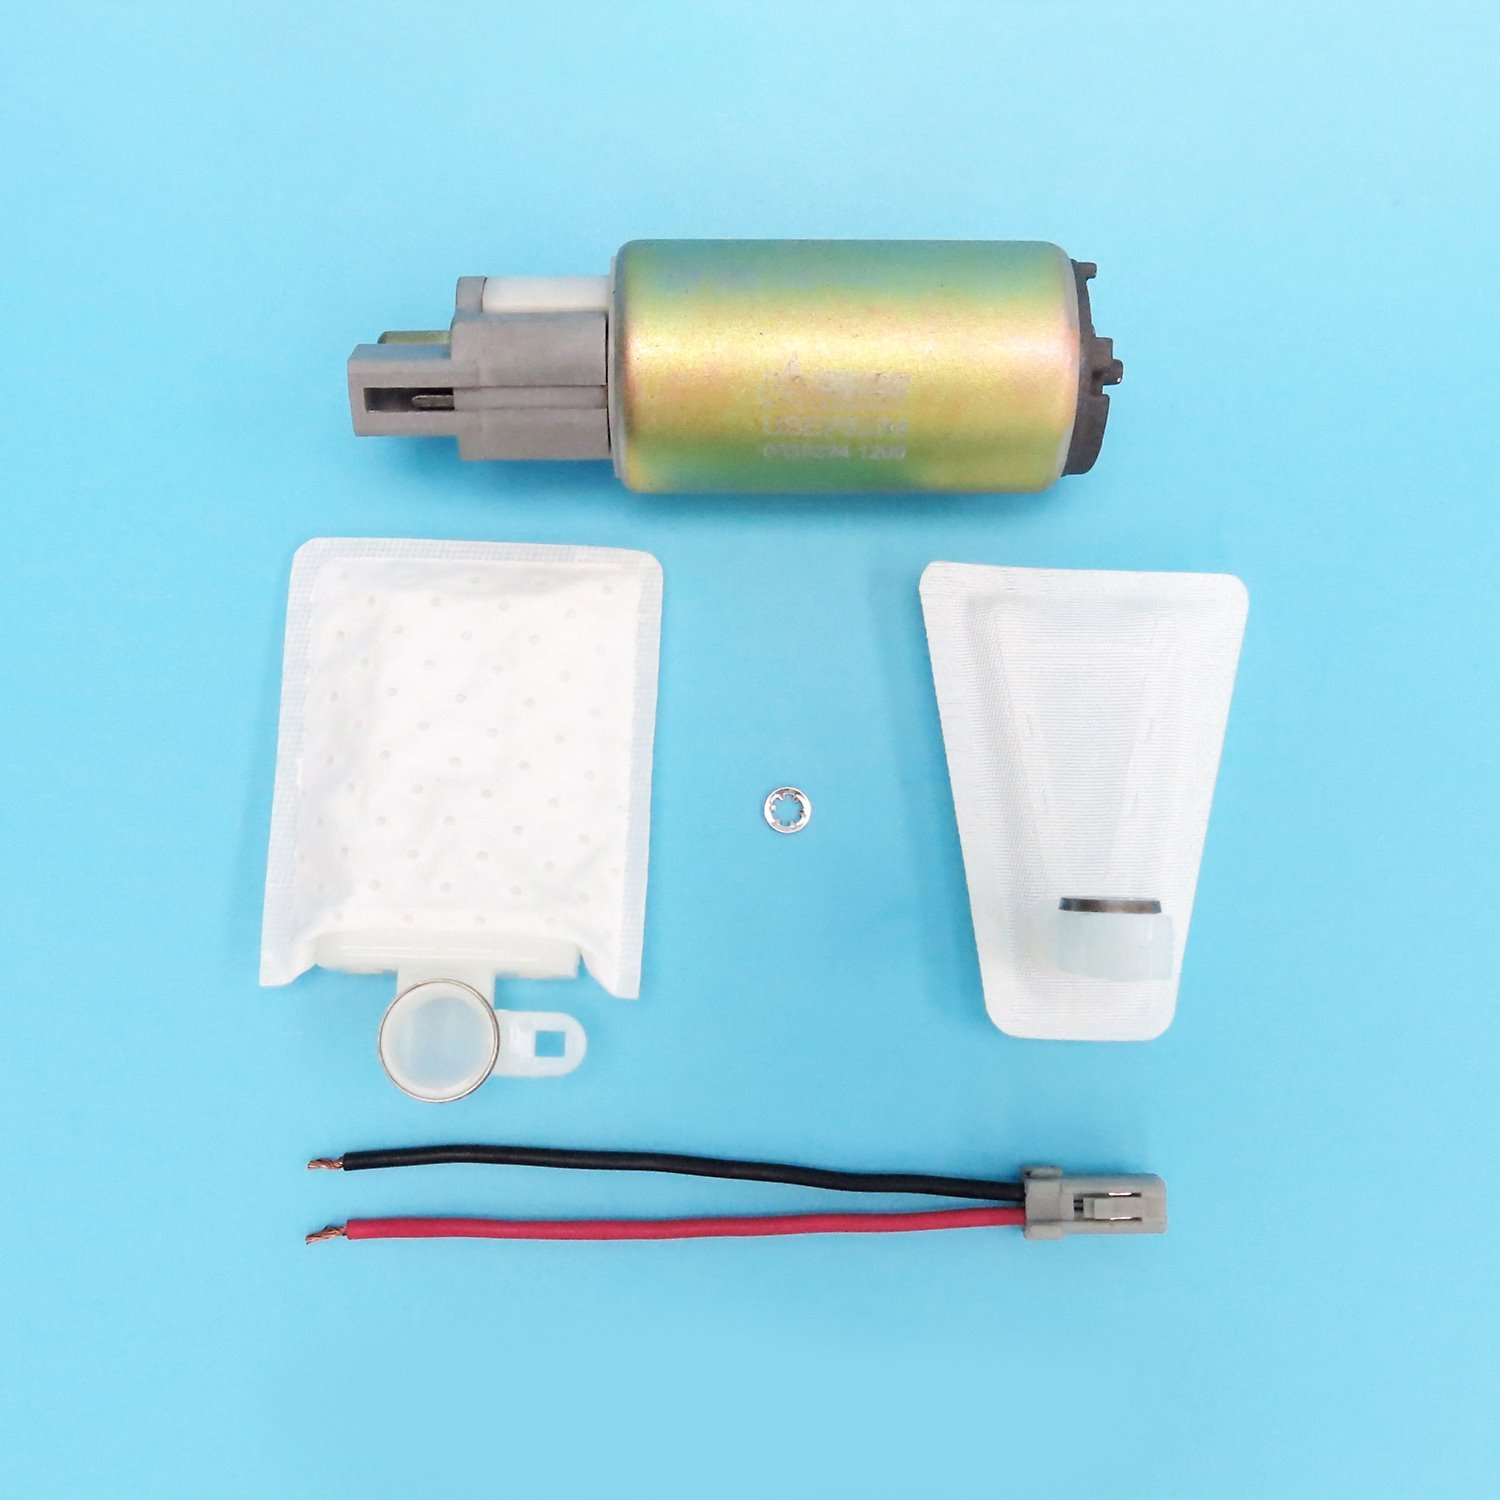 US Motor Works Fuel Pump Kit for 1992-2000 Ford/Mercury Vehicles